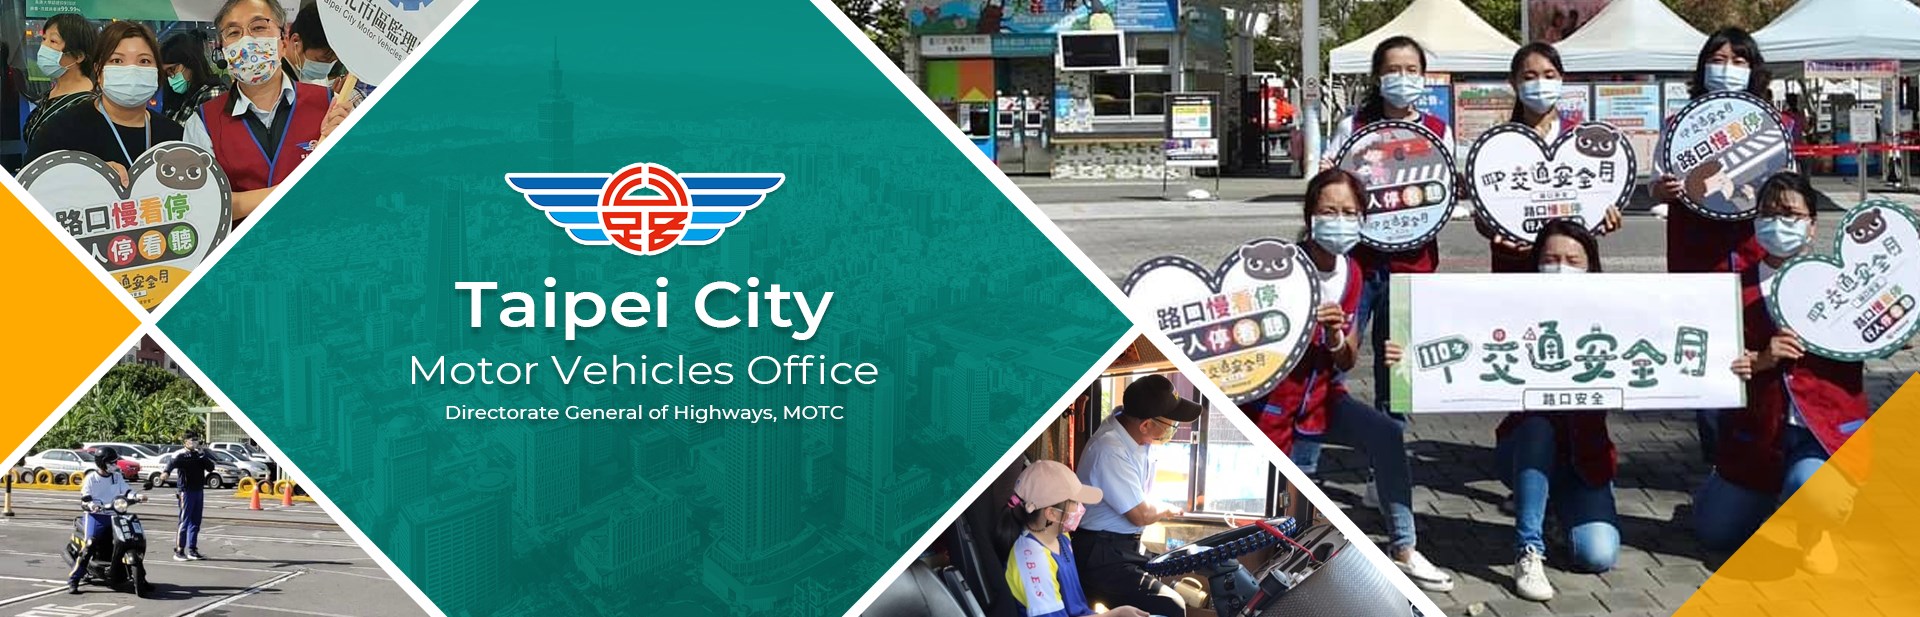 Welcome to Taipei City Motor Vehicles Office